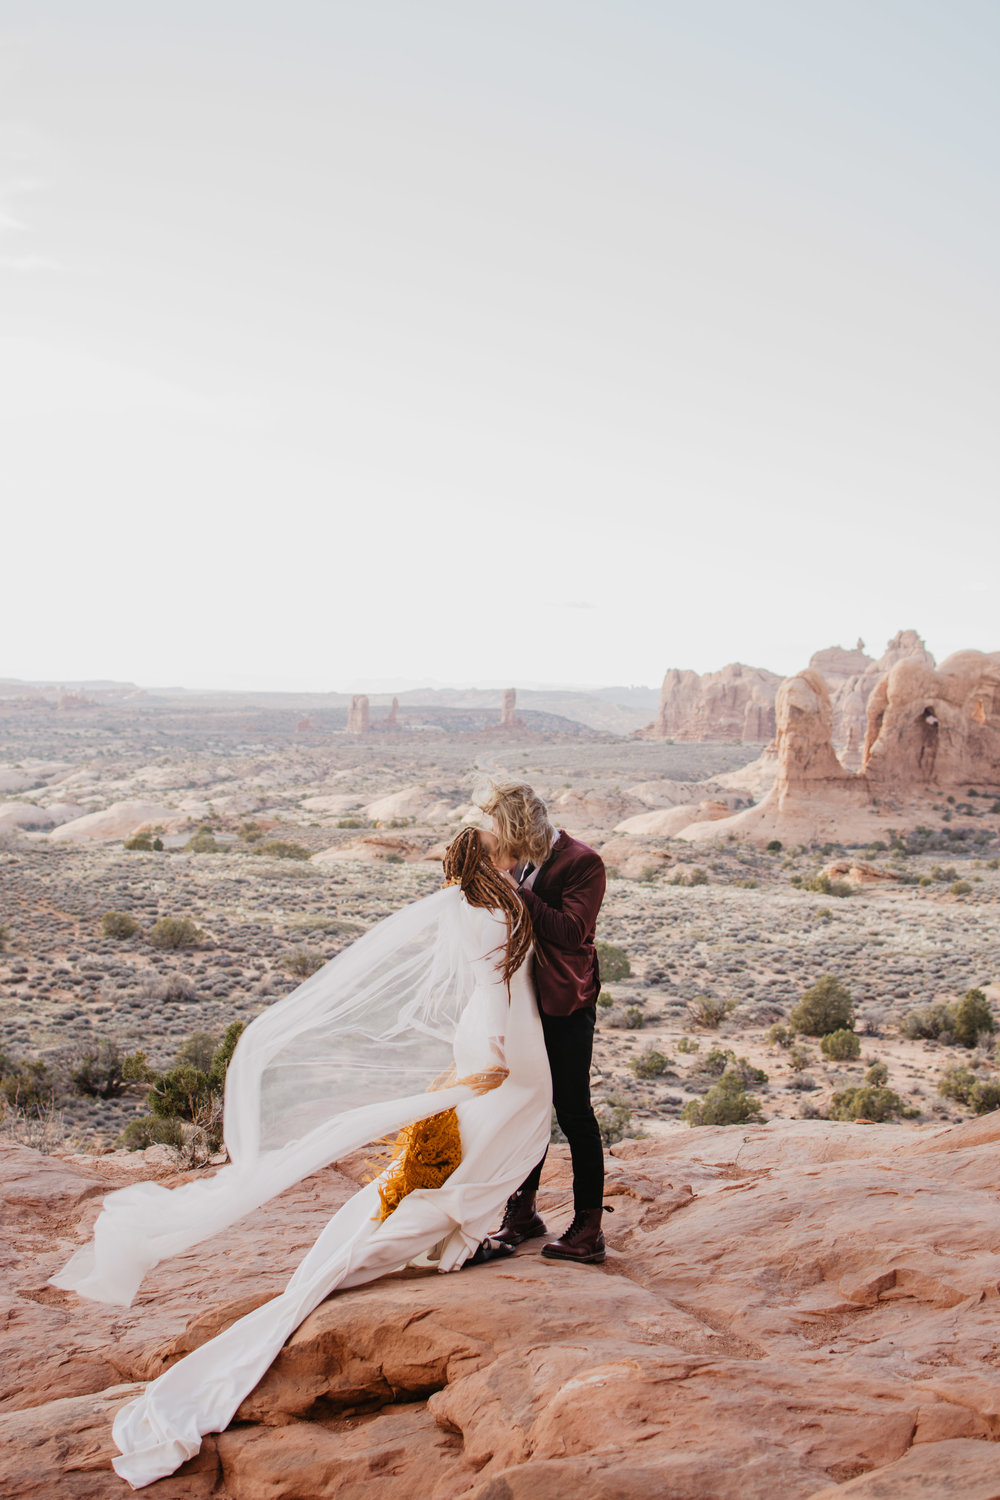 bride and groom standing on Utah's red rocks in Moab Utah for their adventure elopement. Bride and groom kissing on the red rocks in Moab Utah as the wind blows the bride veil and dressJocilyn Bennett Photography | How to Plan an Elopement | Why Elope | Reasons to Elope | Destination Wedding Photographer | Utah Wedding Photographer | Adventure Photographer | Destination Elopement Photographer | Traveling Photographer | Arches National Park | Arches National Park Elopement | Southern Utah Elopement | Boho Bride | Bride with dreads |